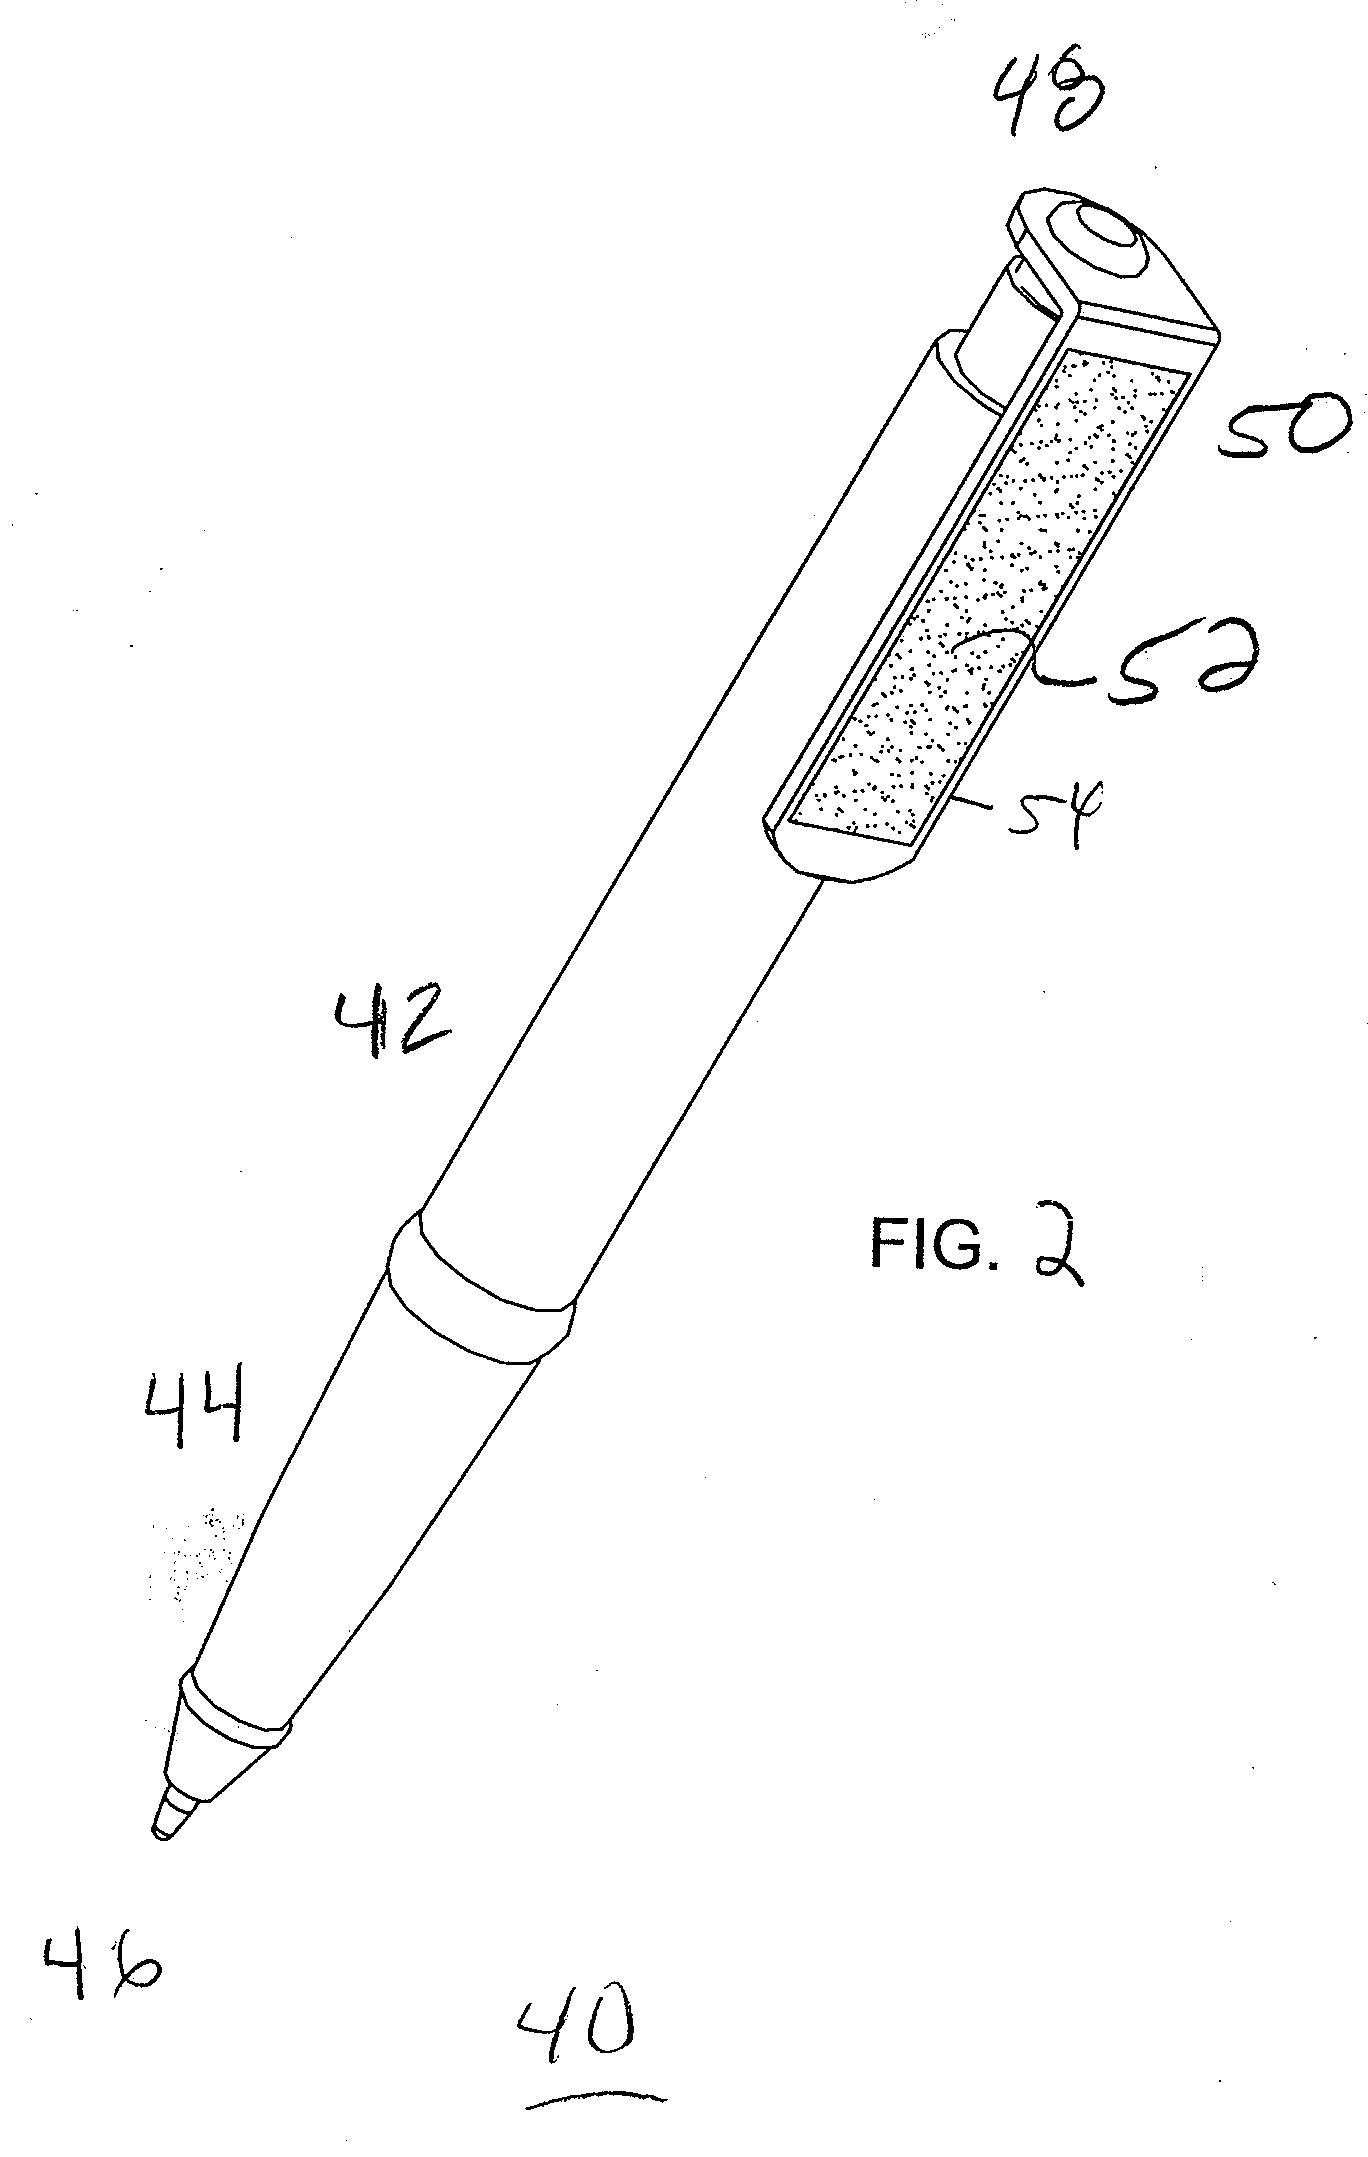 Writing instrument fitted with a filing sleeve, which acts as a plunging mechanism and has an abrasive surface to be used for nail filing